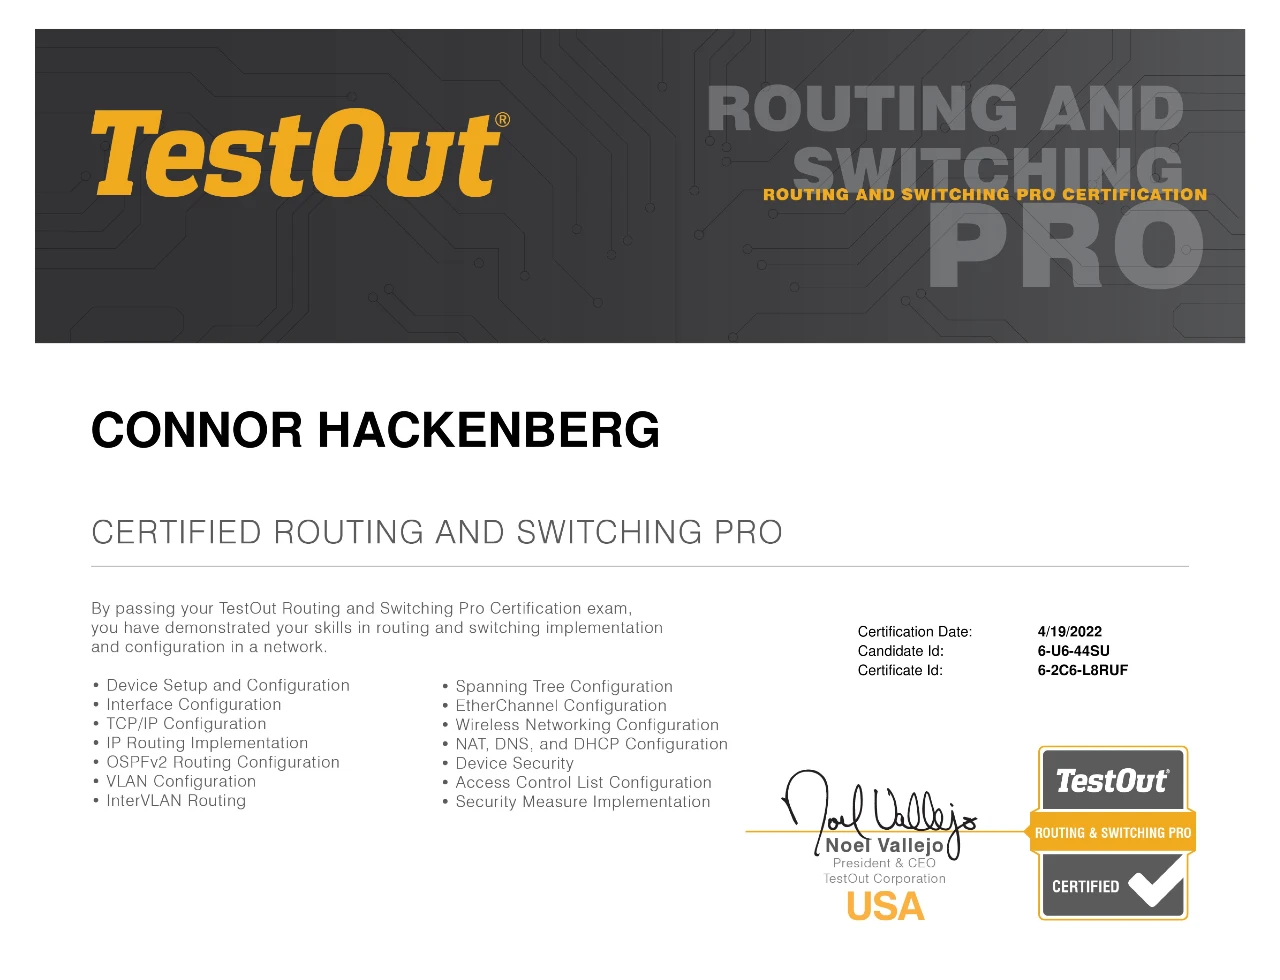 TestOut Routing & Switching Pro Certification